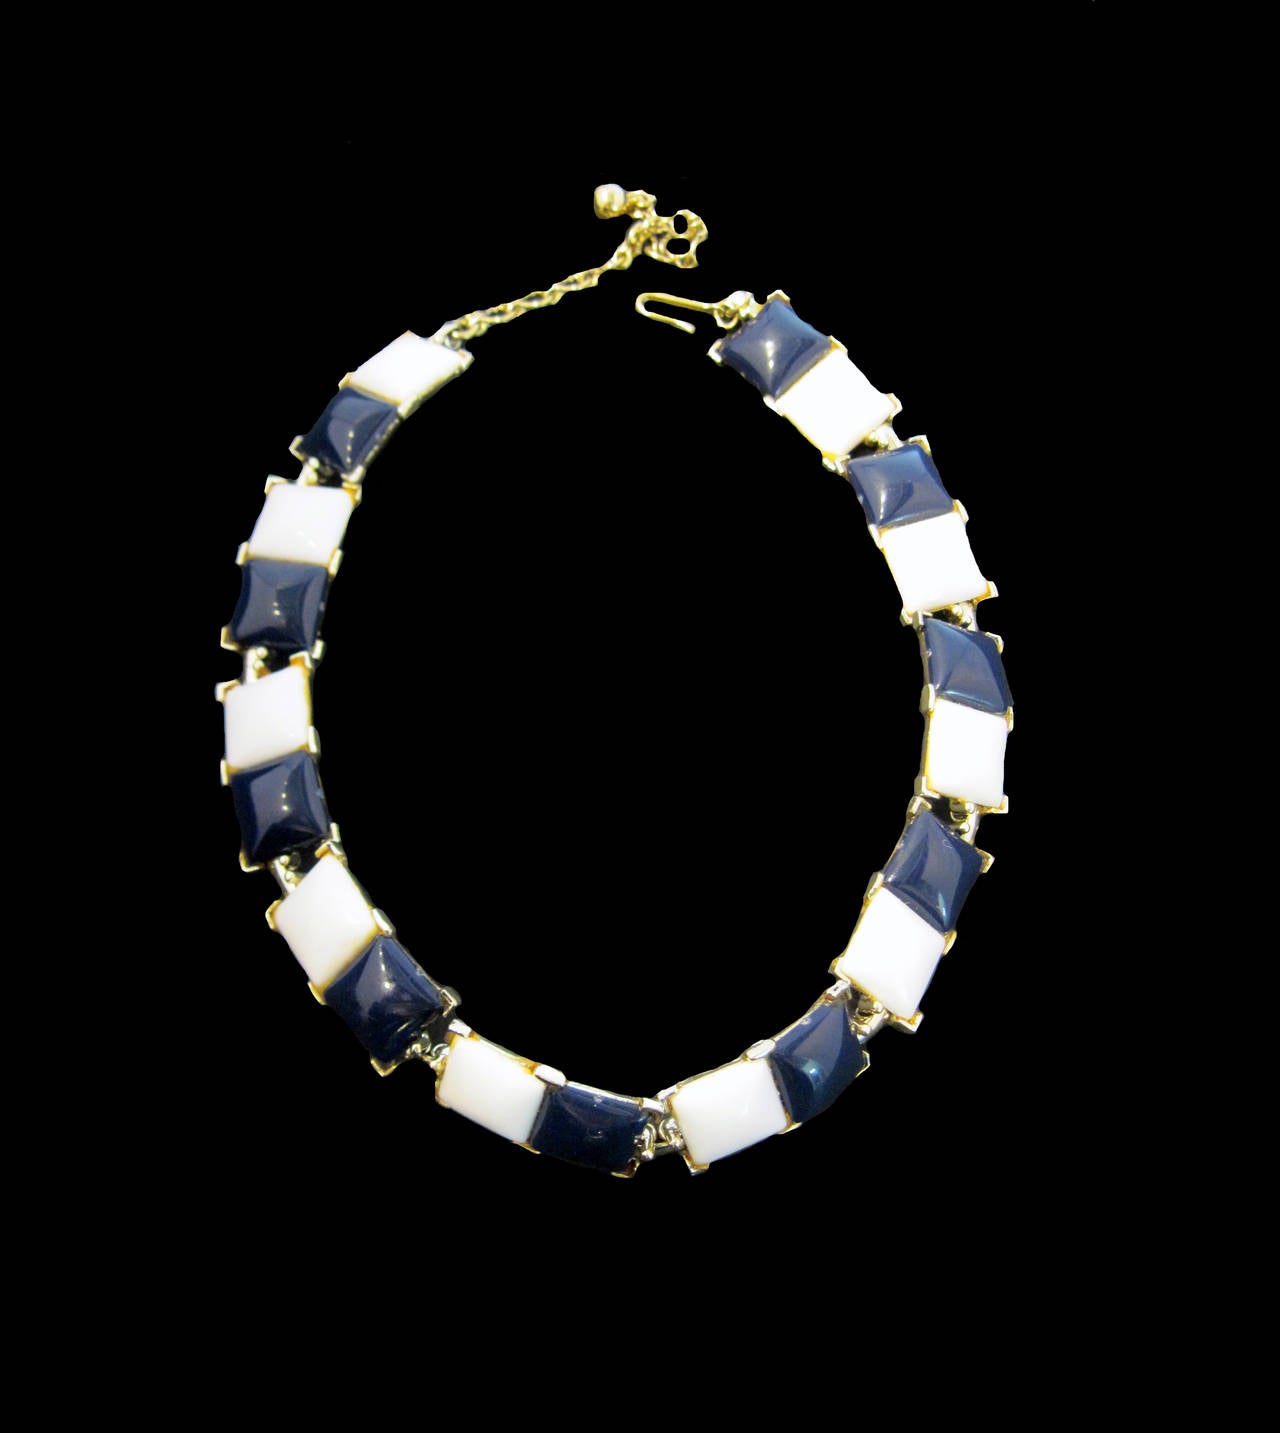 This vintage signed Kramer set features navy blue and white enameled resin stones in a gold-tone setting.  The necklace measures 16 ½” x ½” with a hook closure; the bracelet measures 7” x 1” with a fold-over closure.  In excellent condition, this